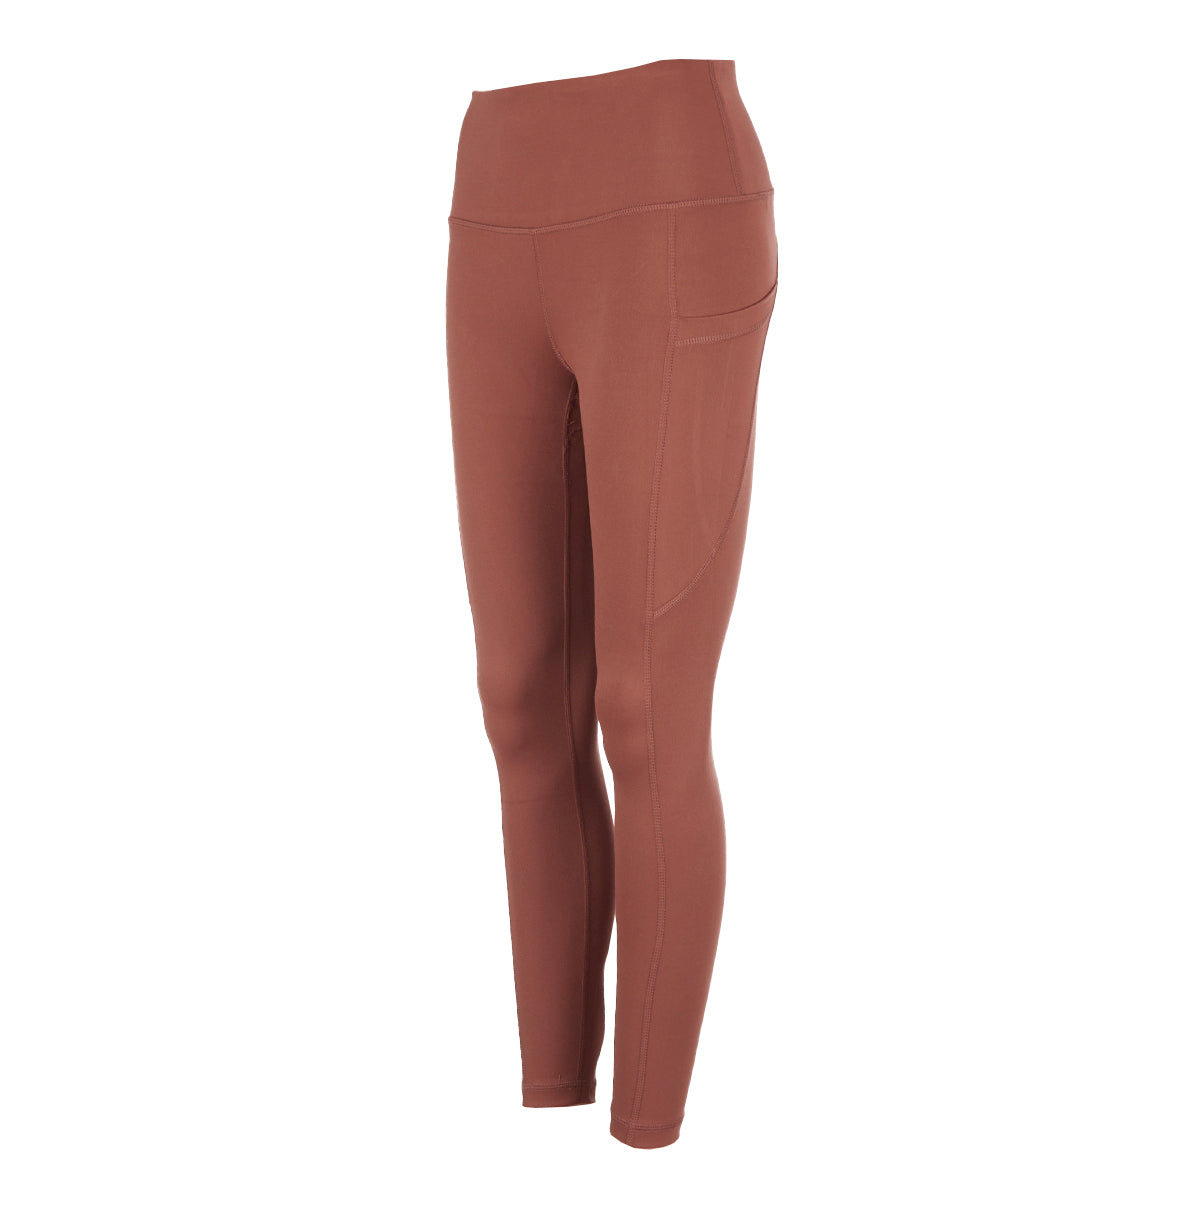 Yoga Licious Lux High Waist, Ankle Legging with Side Pockets